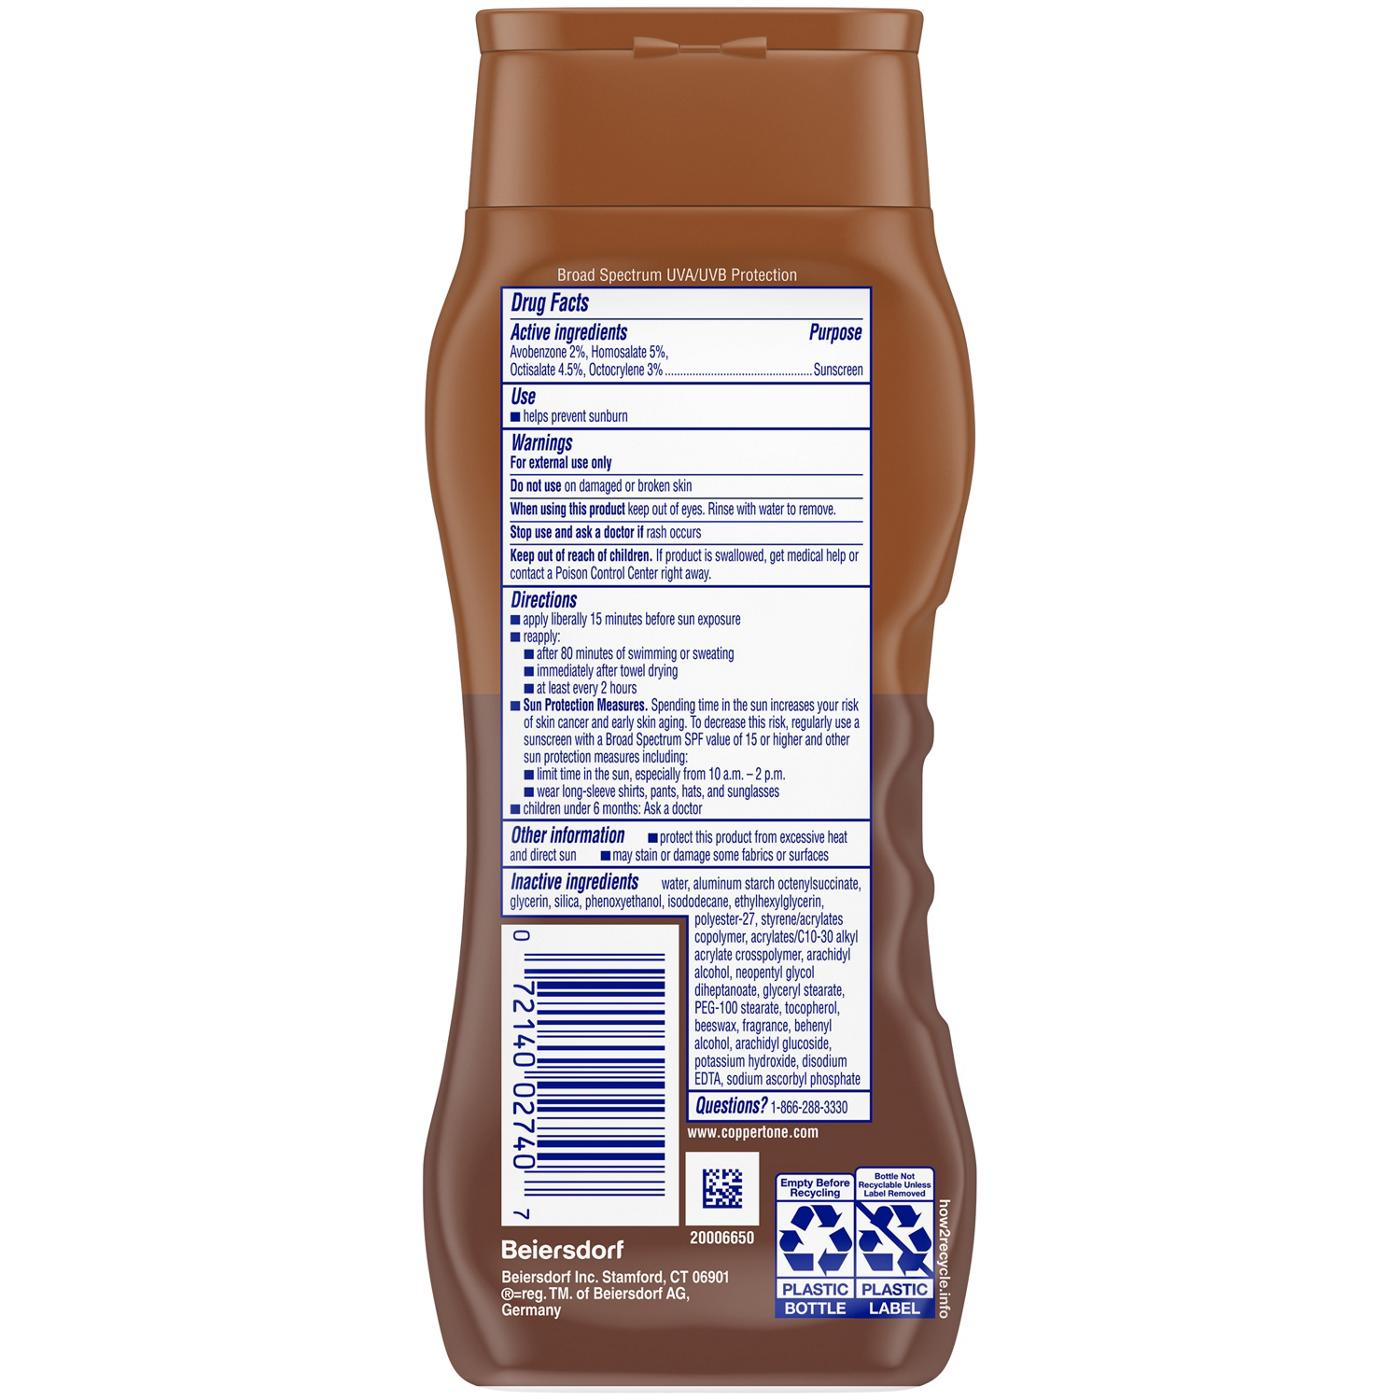 Coppertone Tanning Sunscreen Lotion SPF 15; image 2 of 2